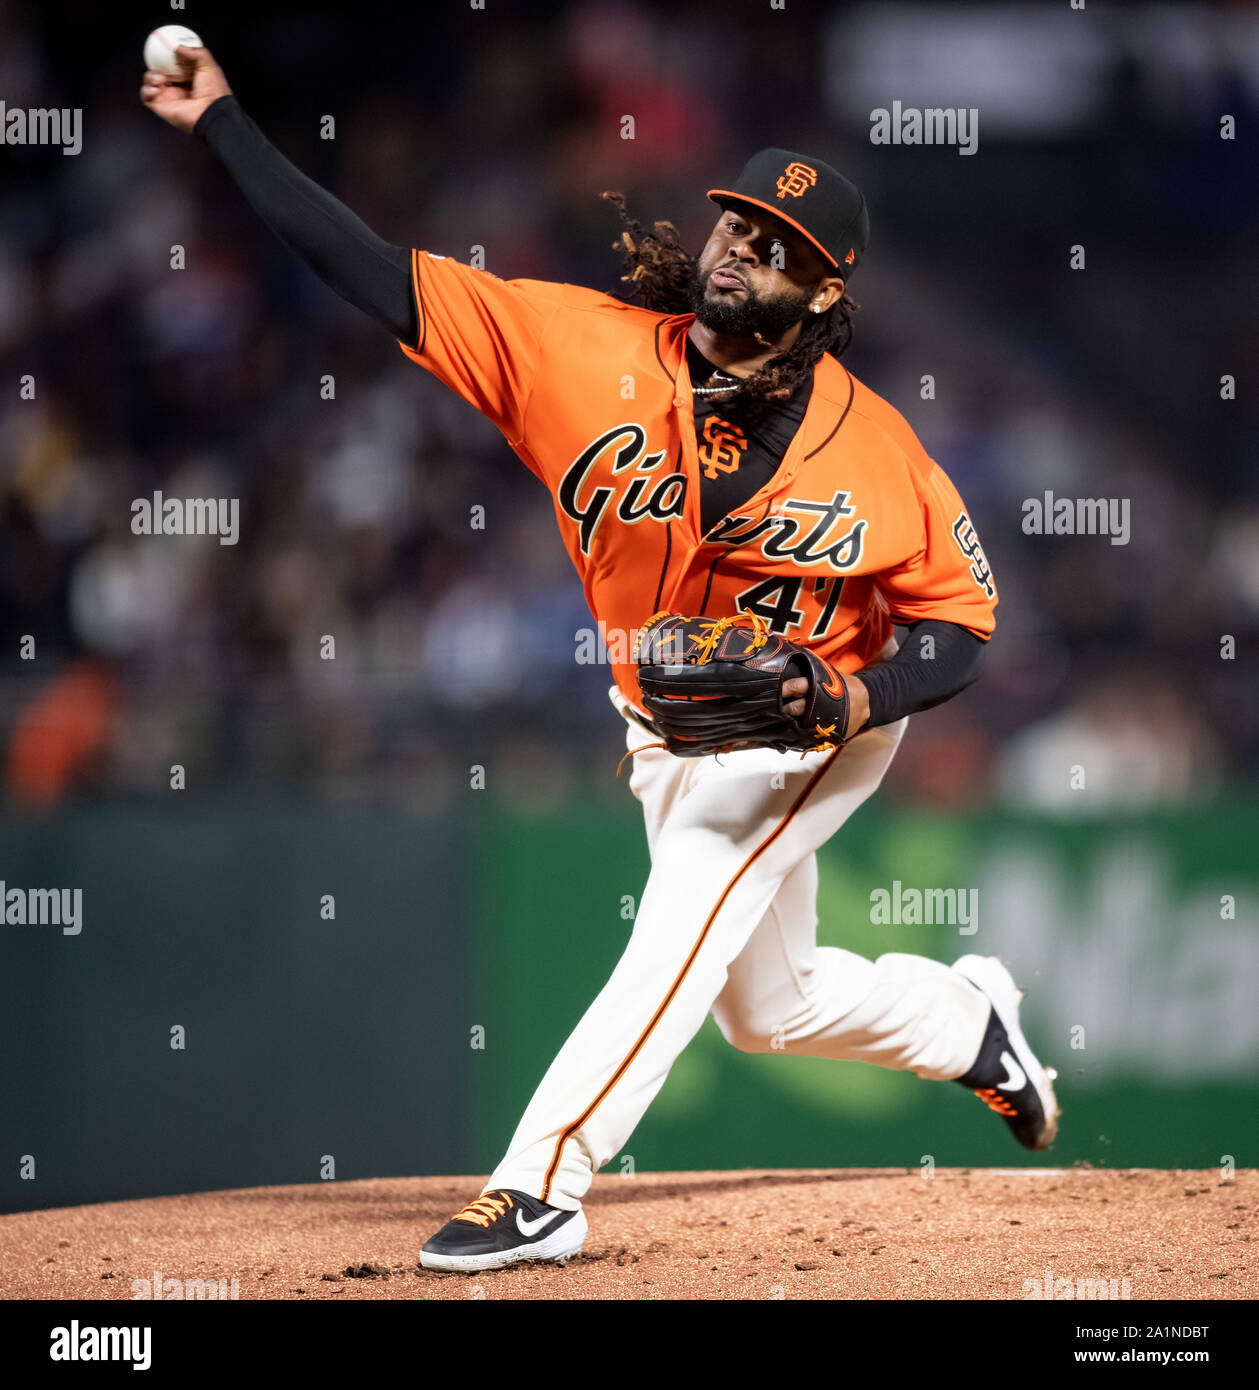 San Francisco, California, USA. 27th Sep, 2019. In his second start after Tommy John surgery, San Francisco Giants starting pitcher Johnny Cueto (47) throws in the first inning, during a MLB game between the Los Angeles Dodgers and the San Francisco Giants at Oracle Park in San Francisco, California. Valerie Shoaps/CSM/Alamy Live News Stock Photo